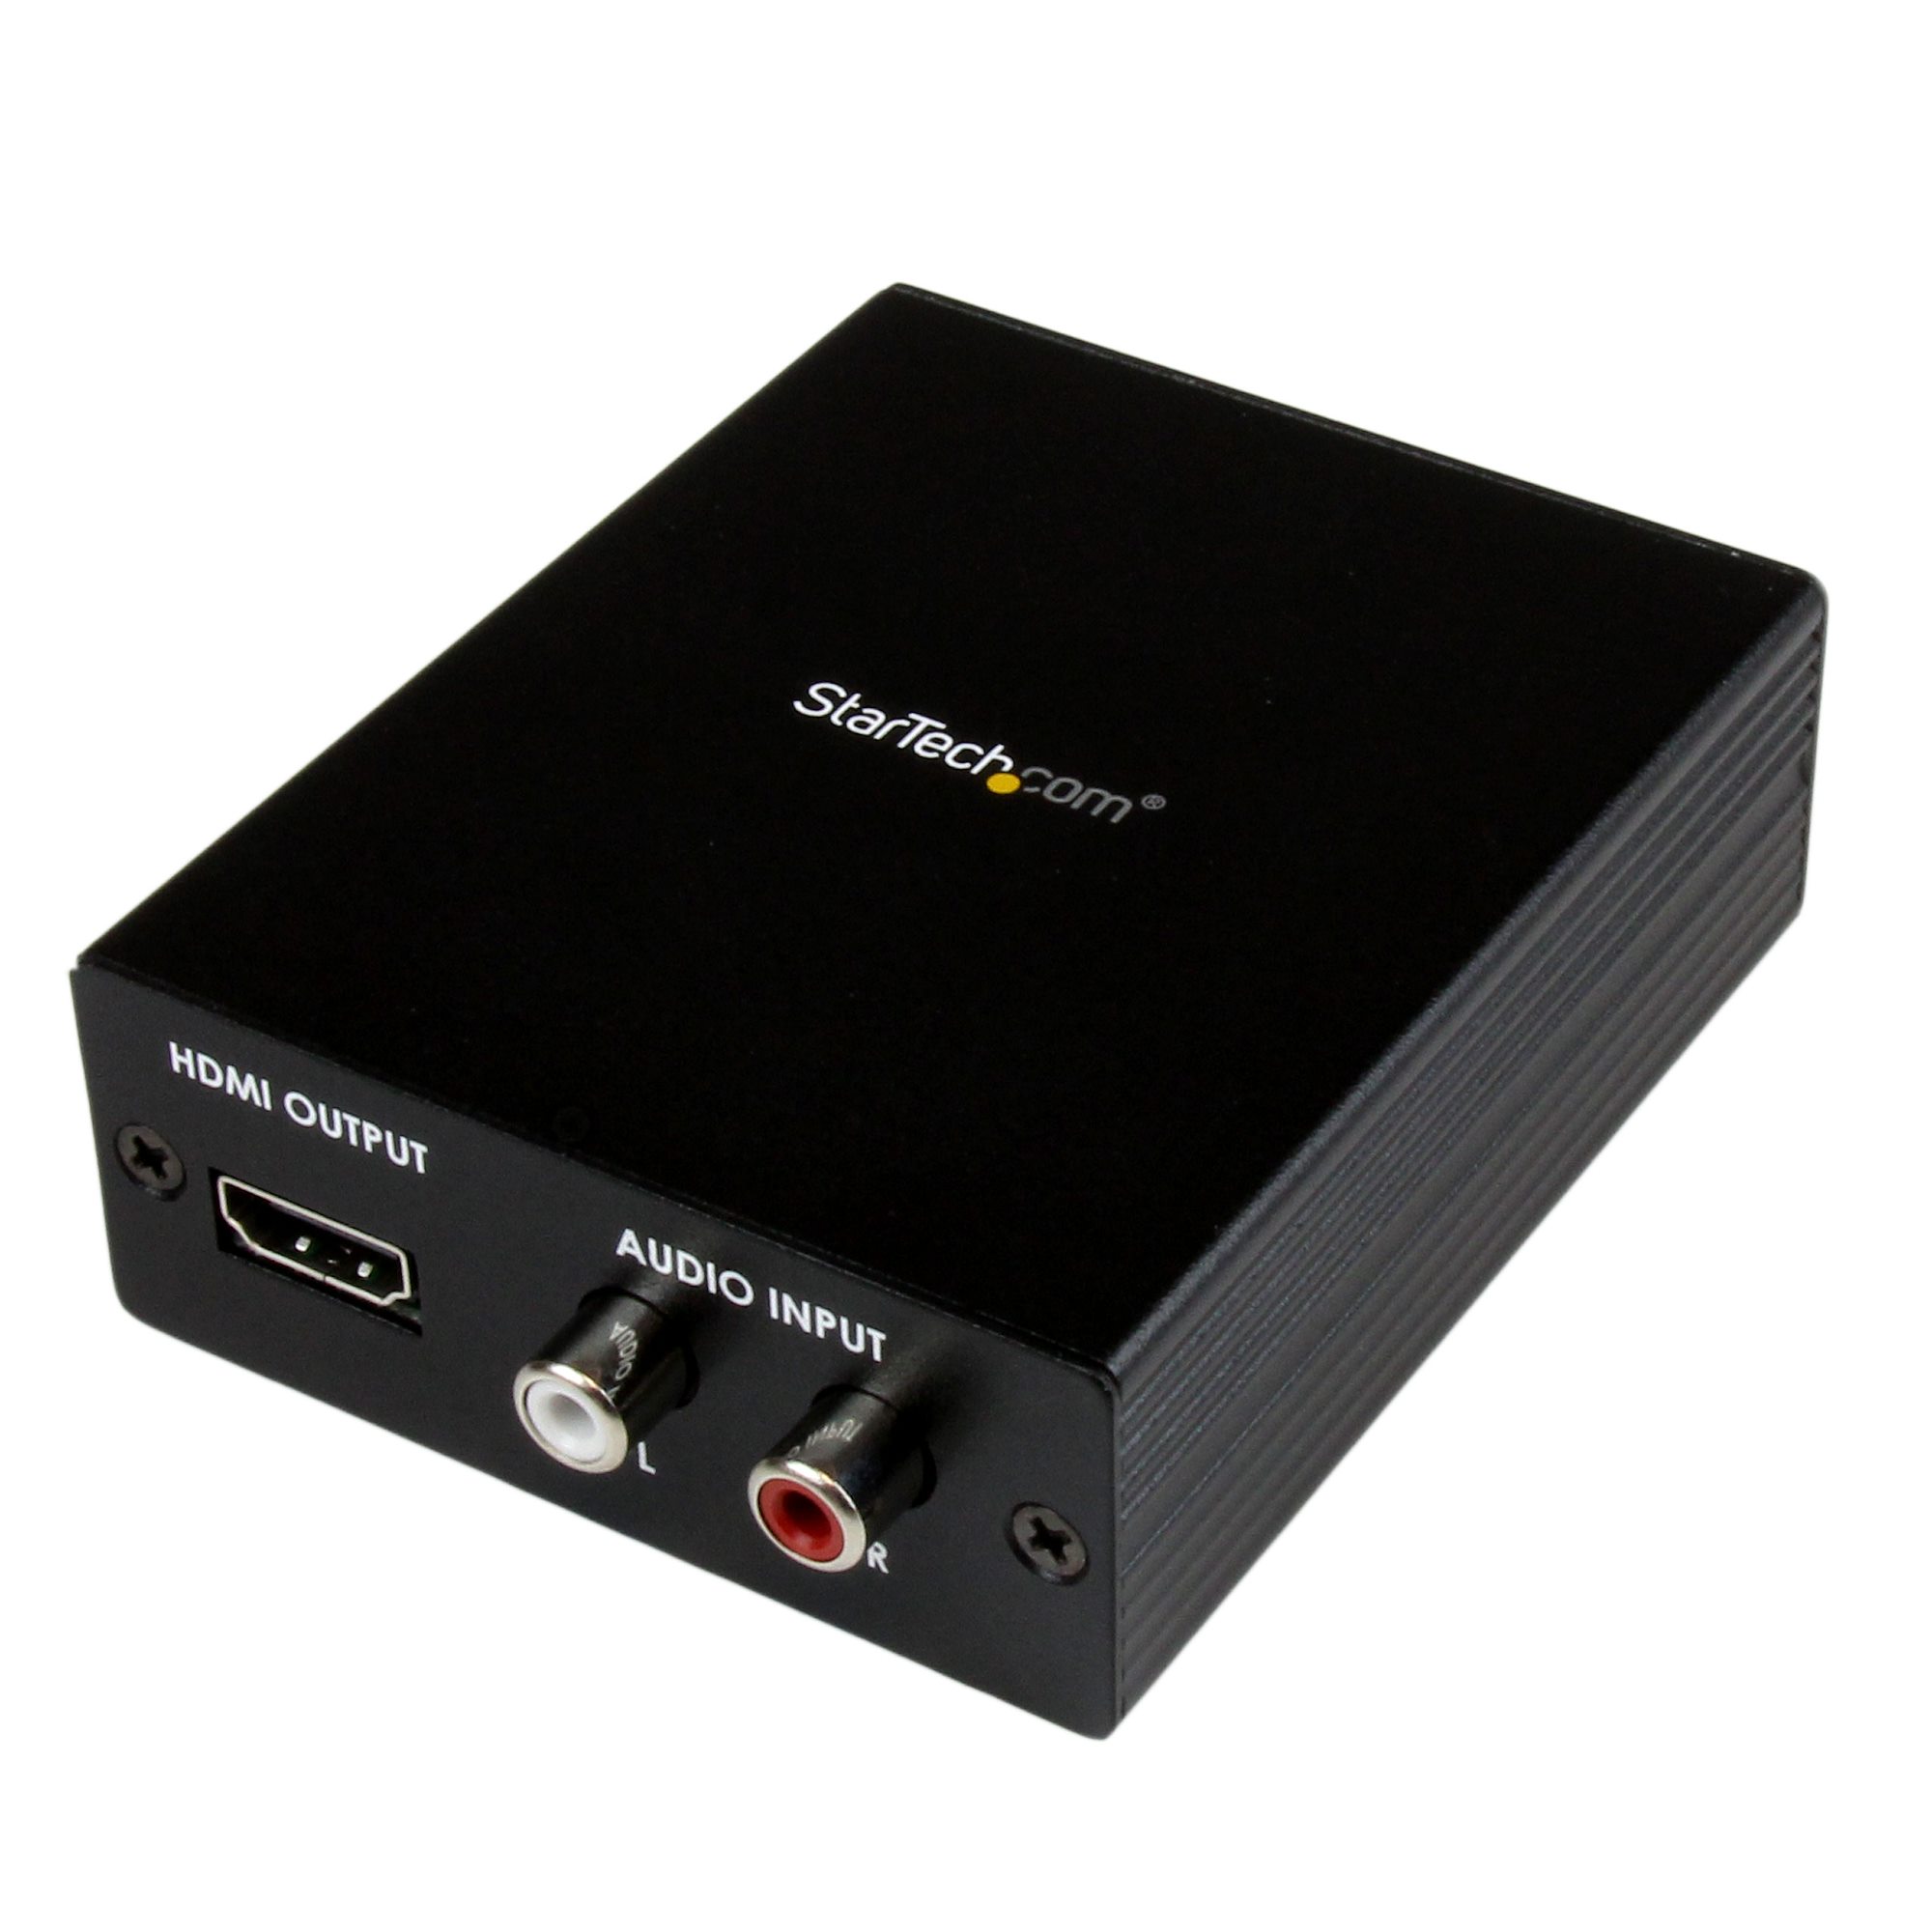 Component / VGA Video and Audio to HDMI Converter - PC to HDMI - 1920x1200